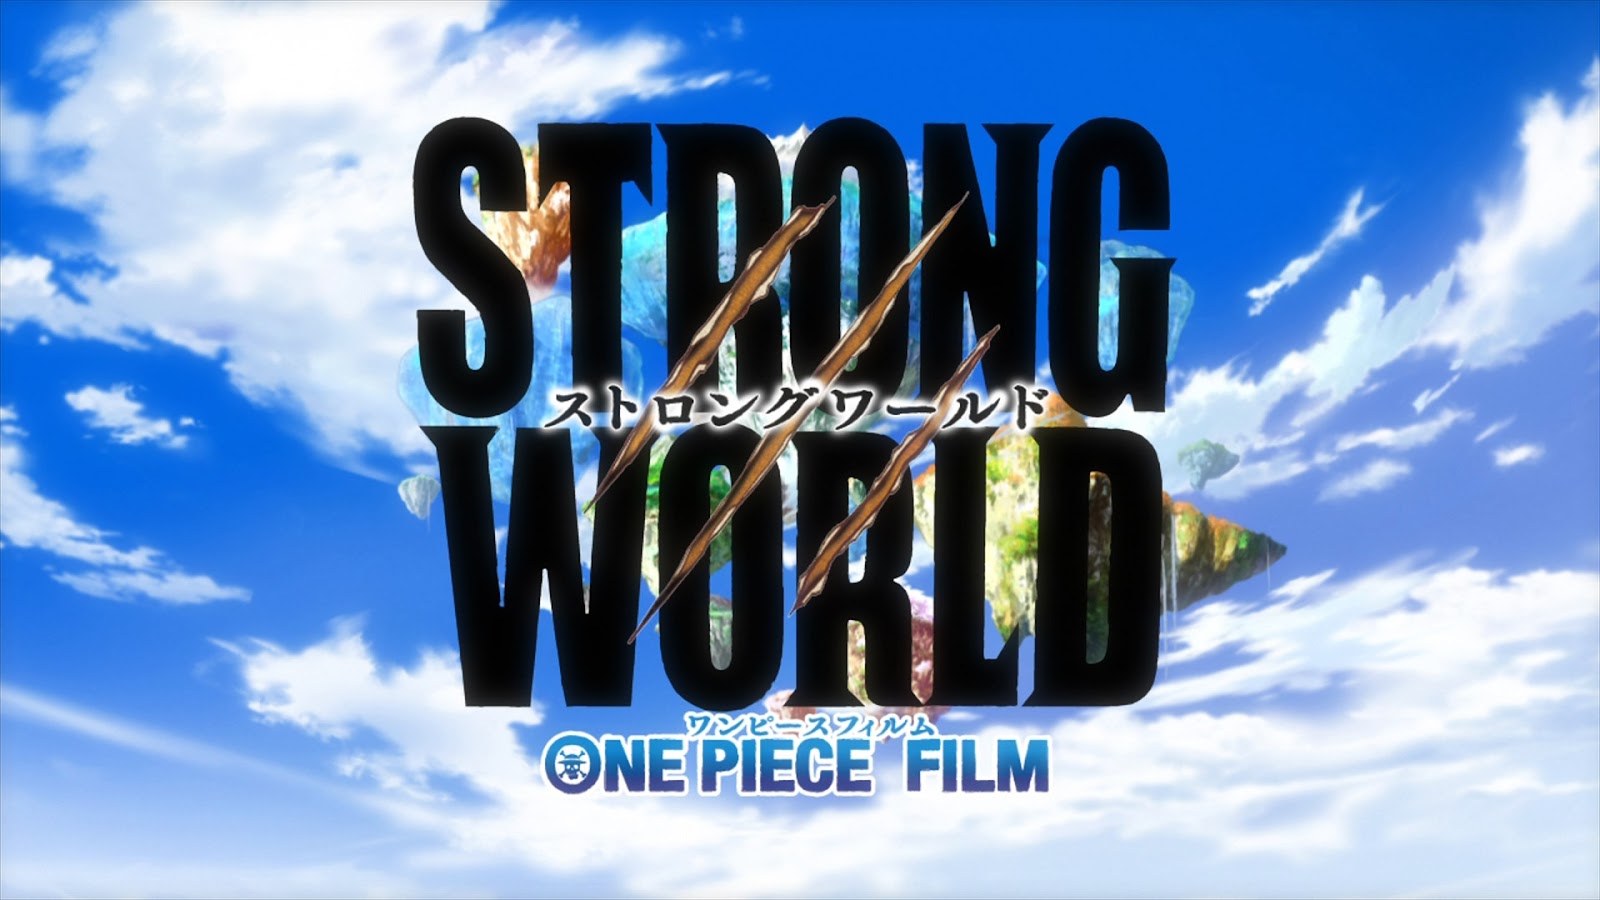 One Piece Film: Strong World (2009) 1080p Remux Latino